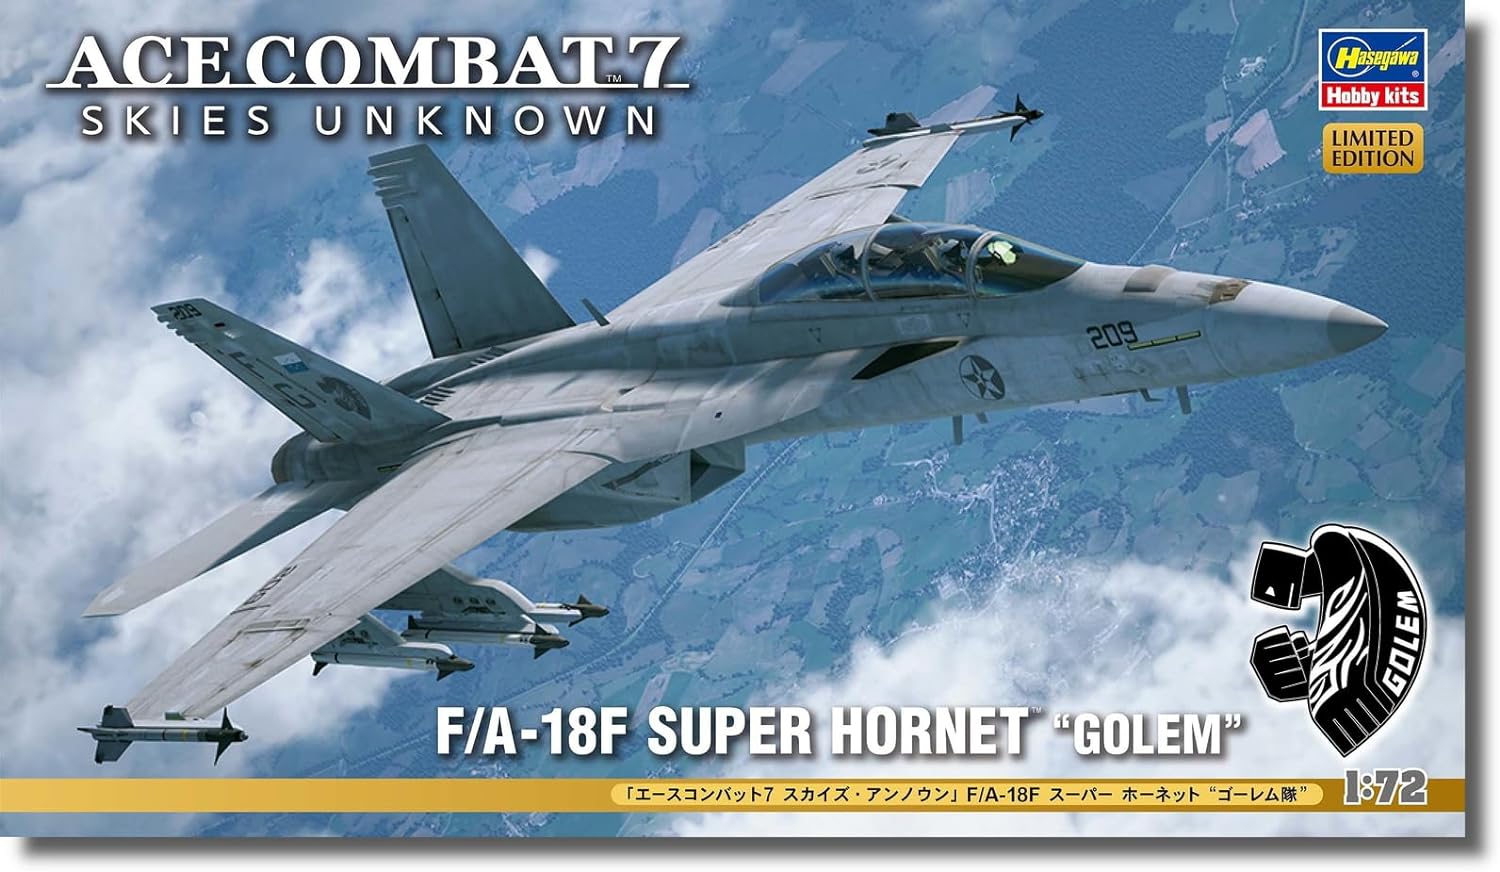 Hasegawa SP596 Creator Works Series Ace Combat 7 Skies Unknown F/A-18F Super Hornet Golem Squad 1/72 Scale